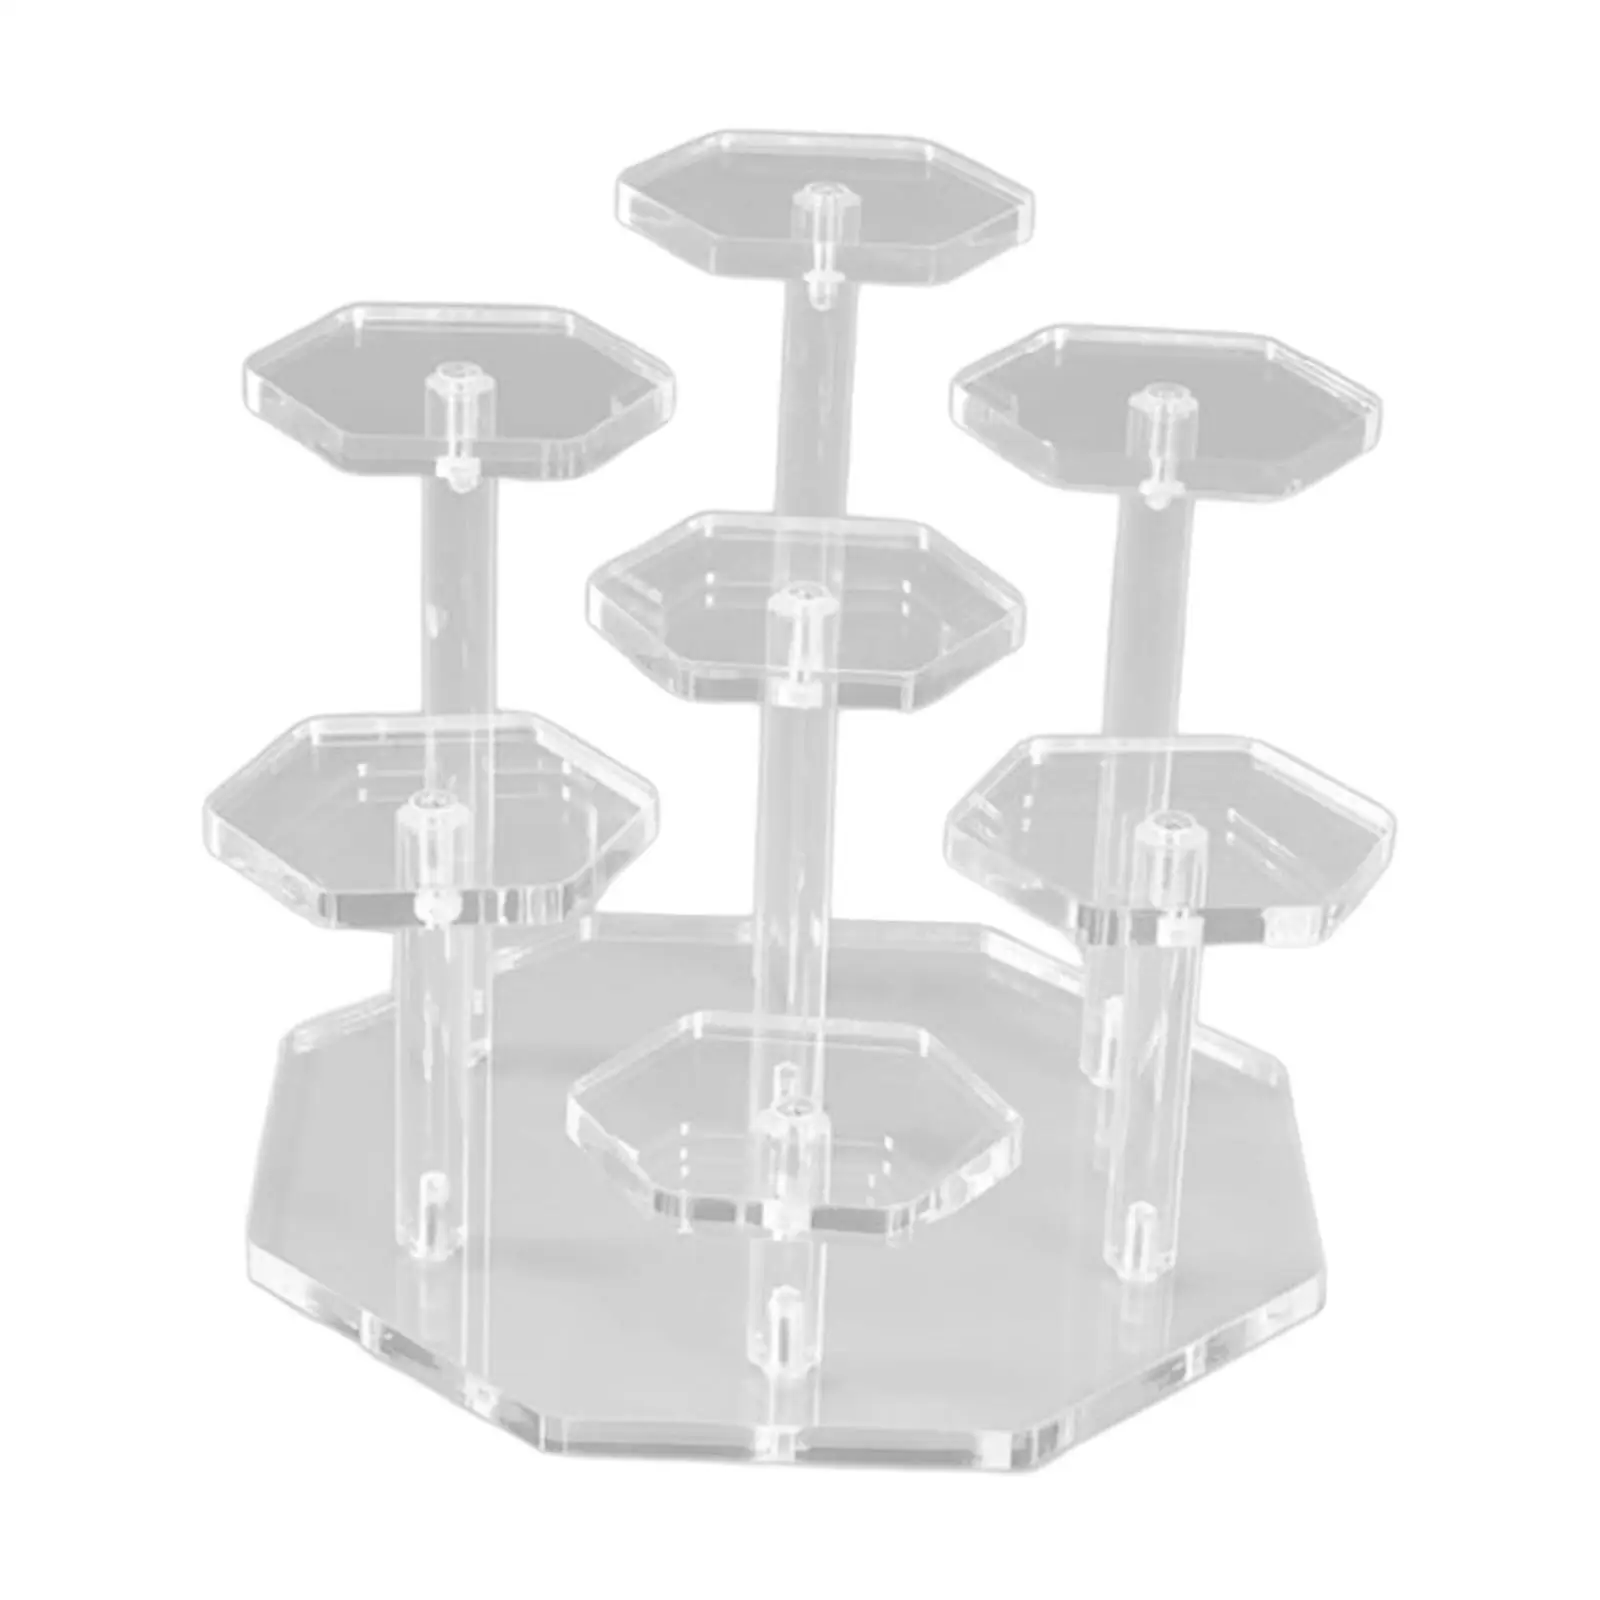 Display Stand Display Risers Collectibles Display Stand Acrylic Risers Organizer Holder for Toys Dessert Desktop Dolls